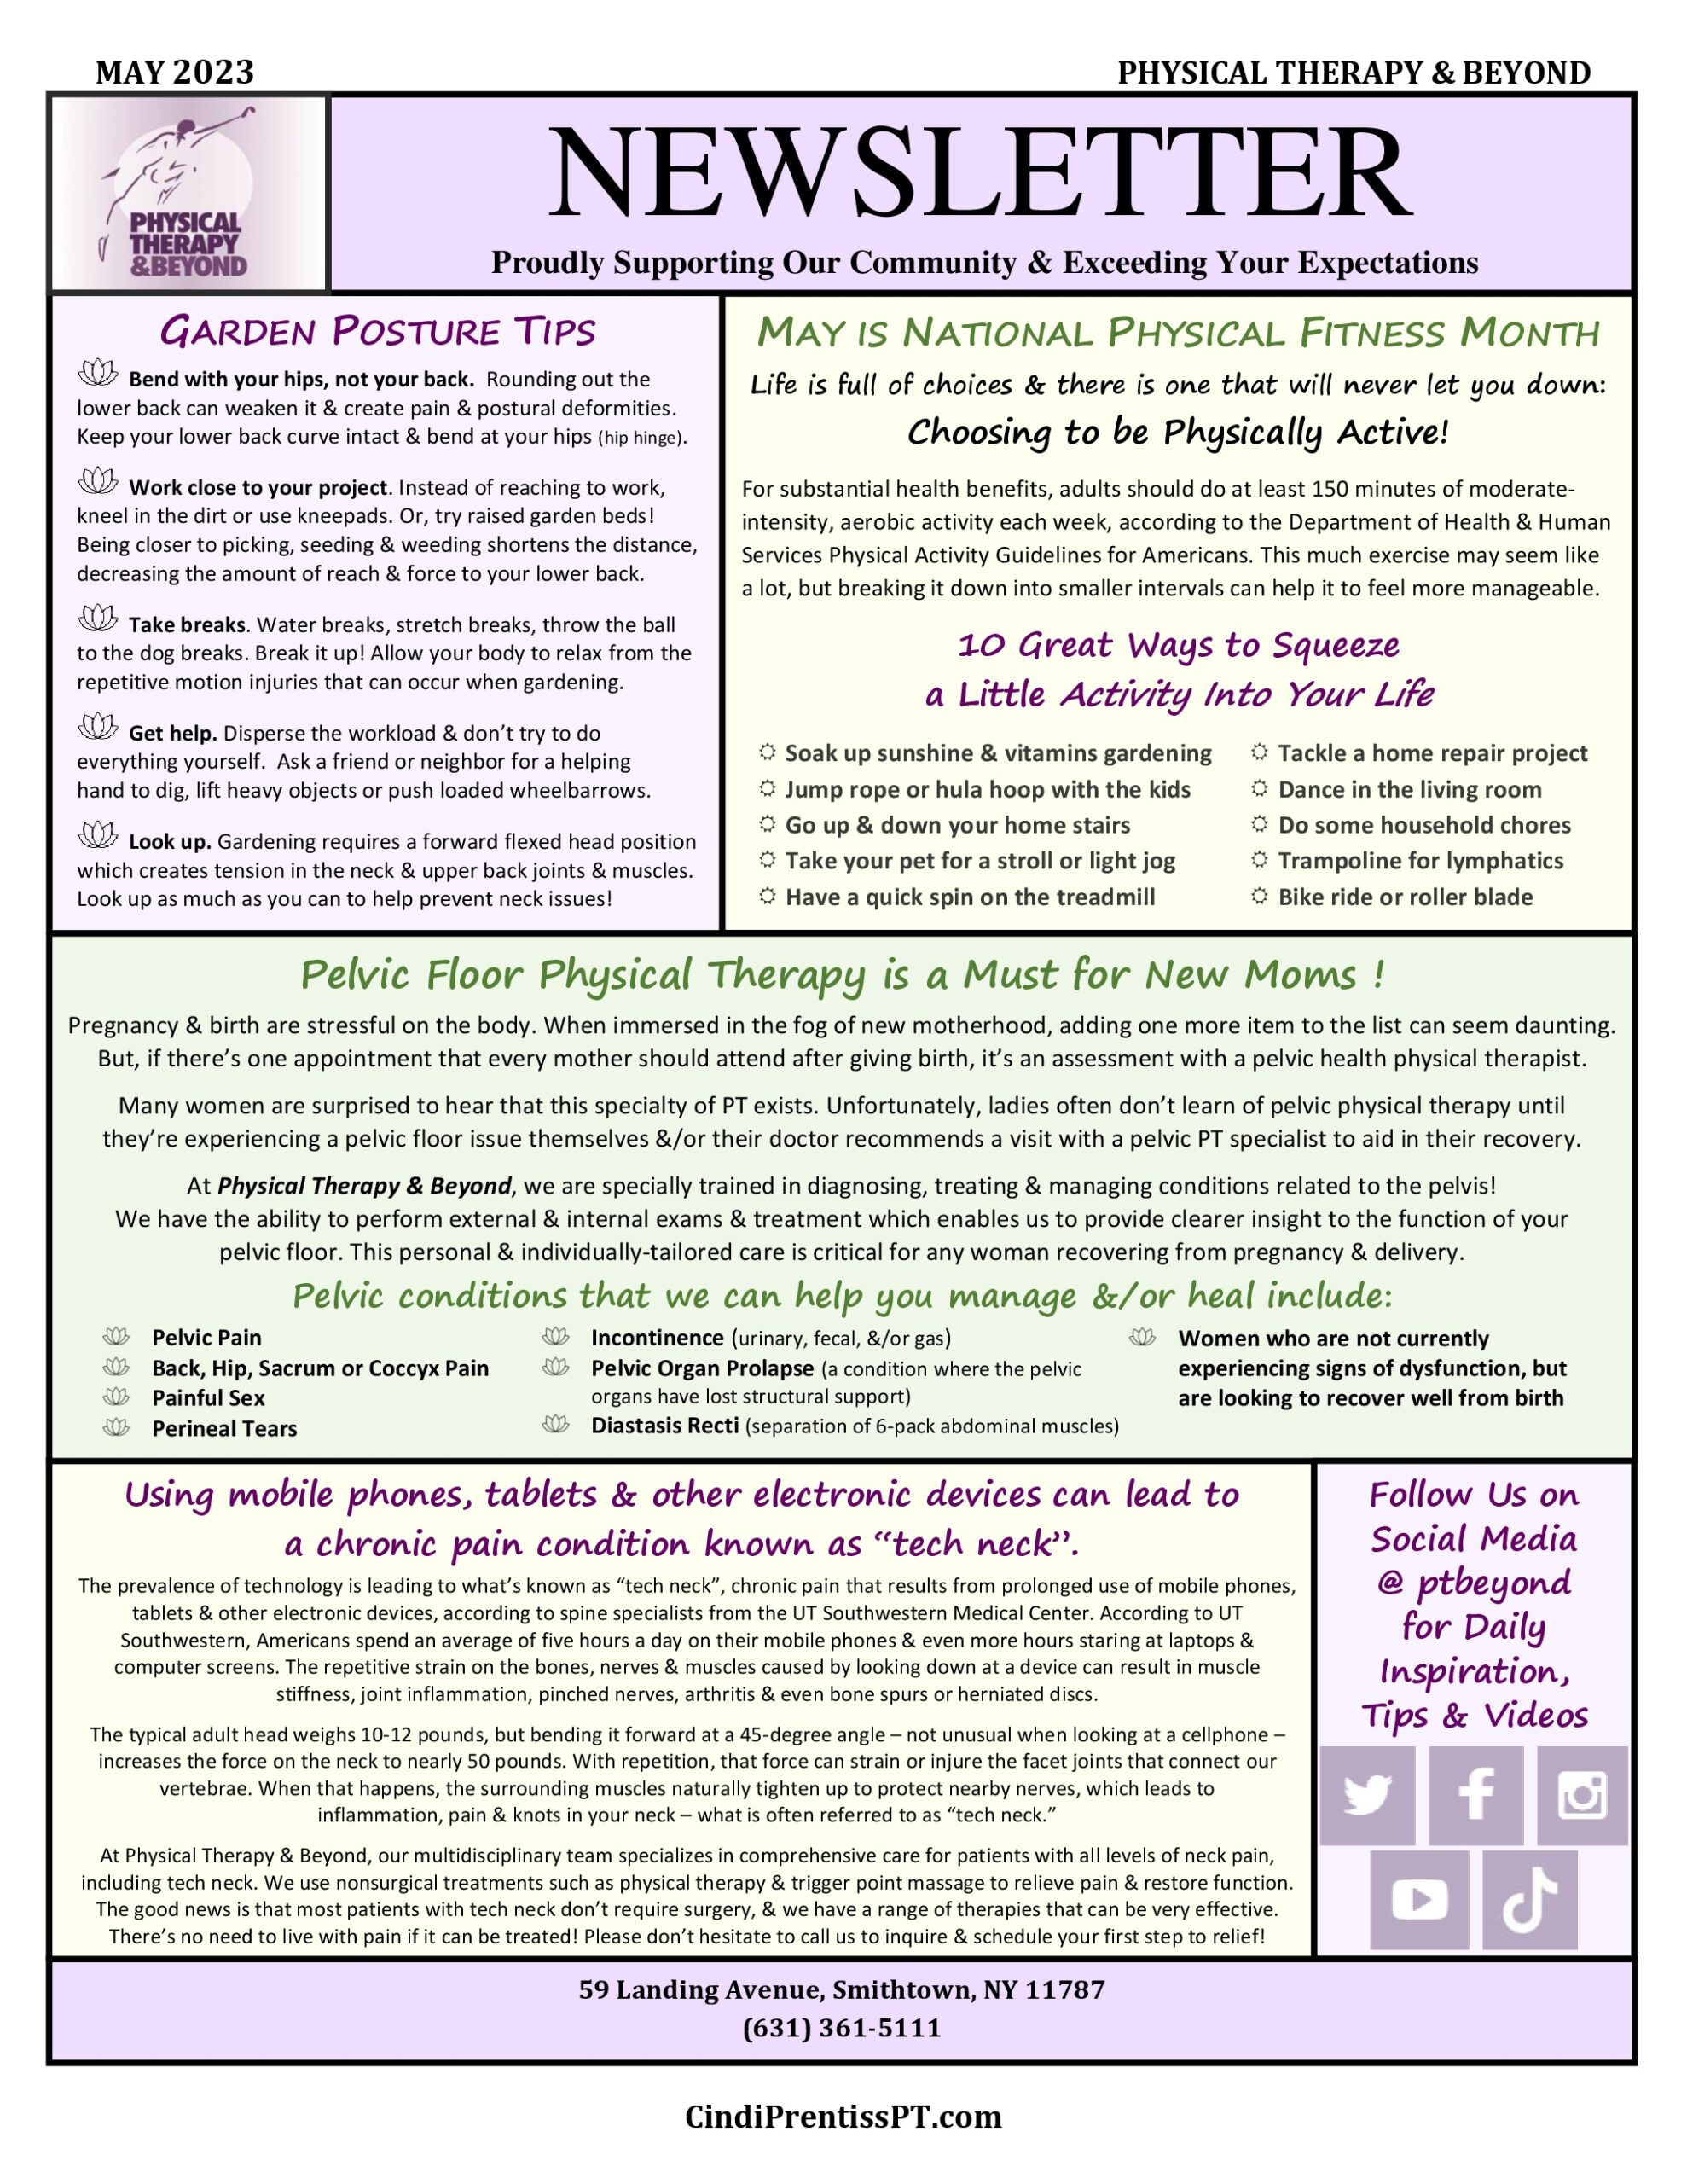 Physical Therapy & Beyond May 2023 Newsletter